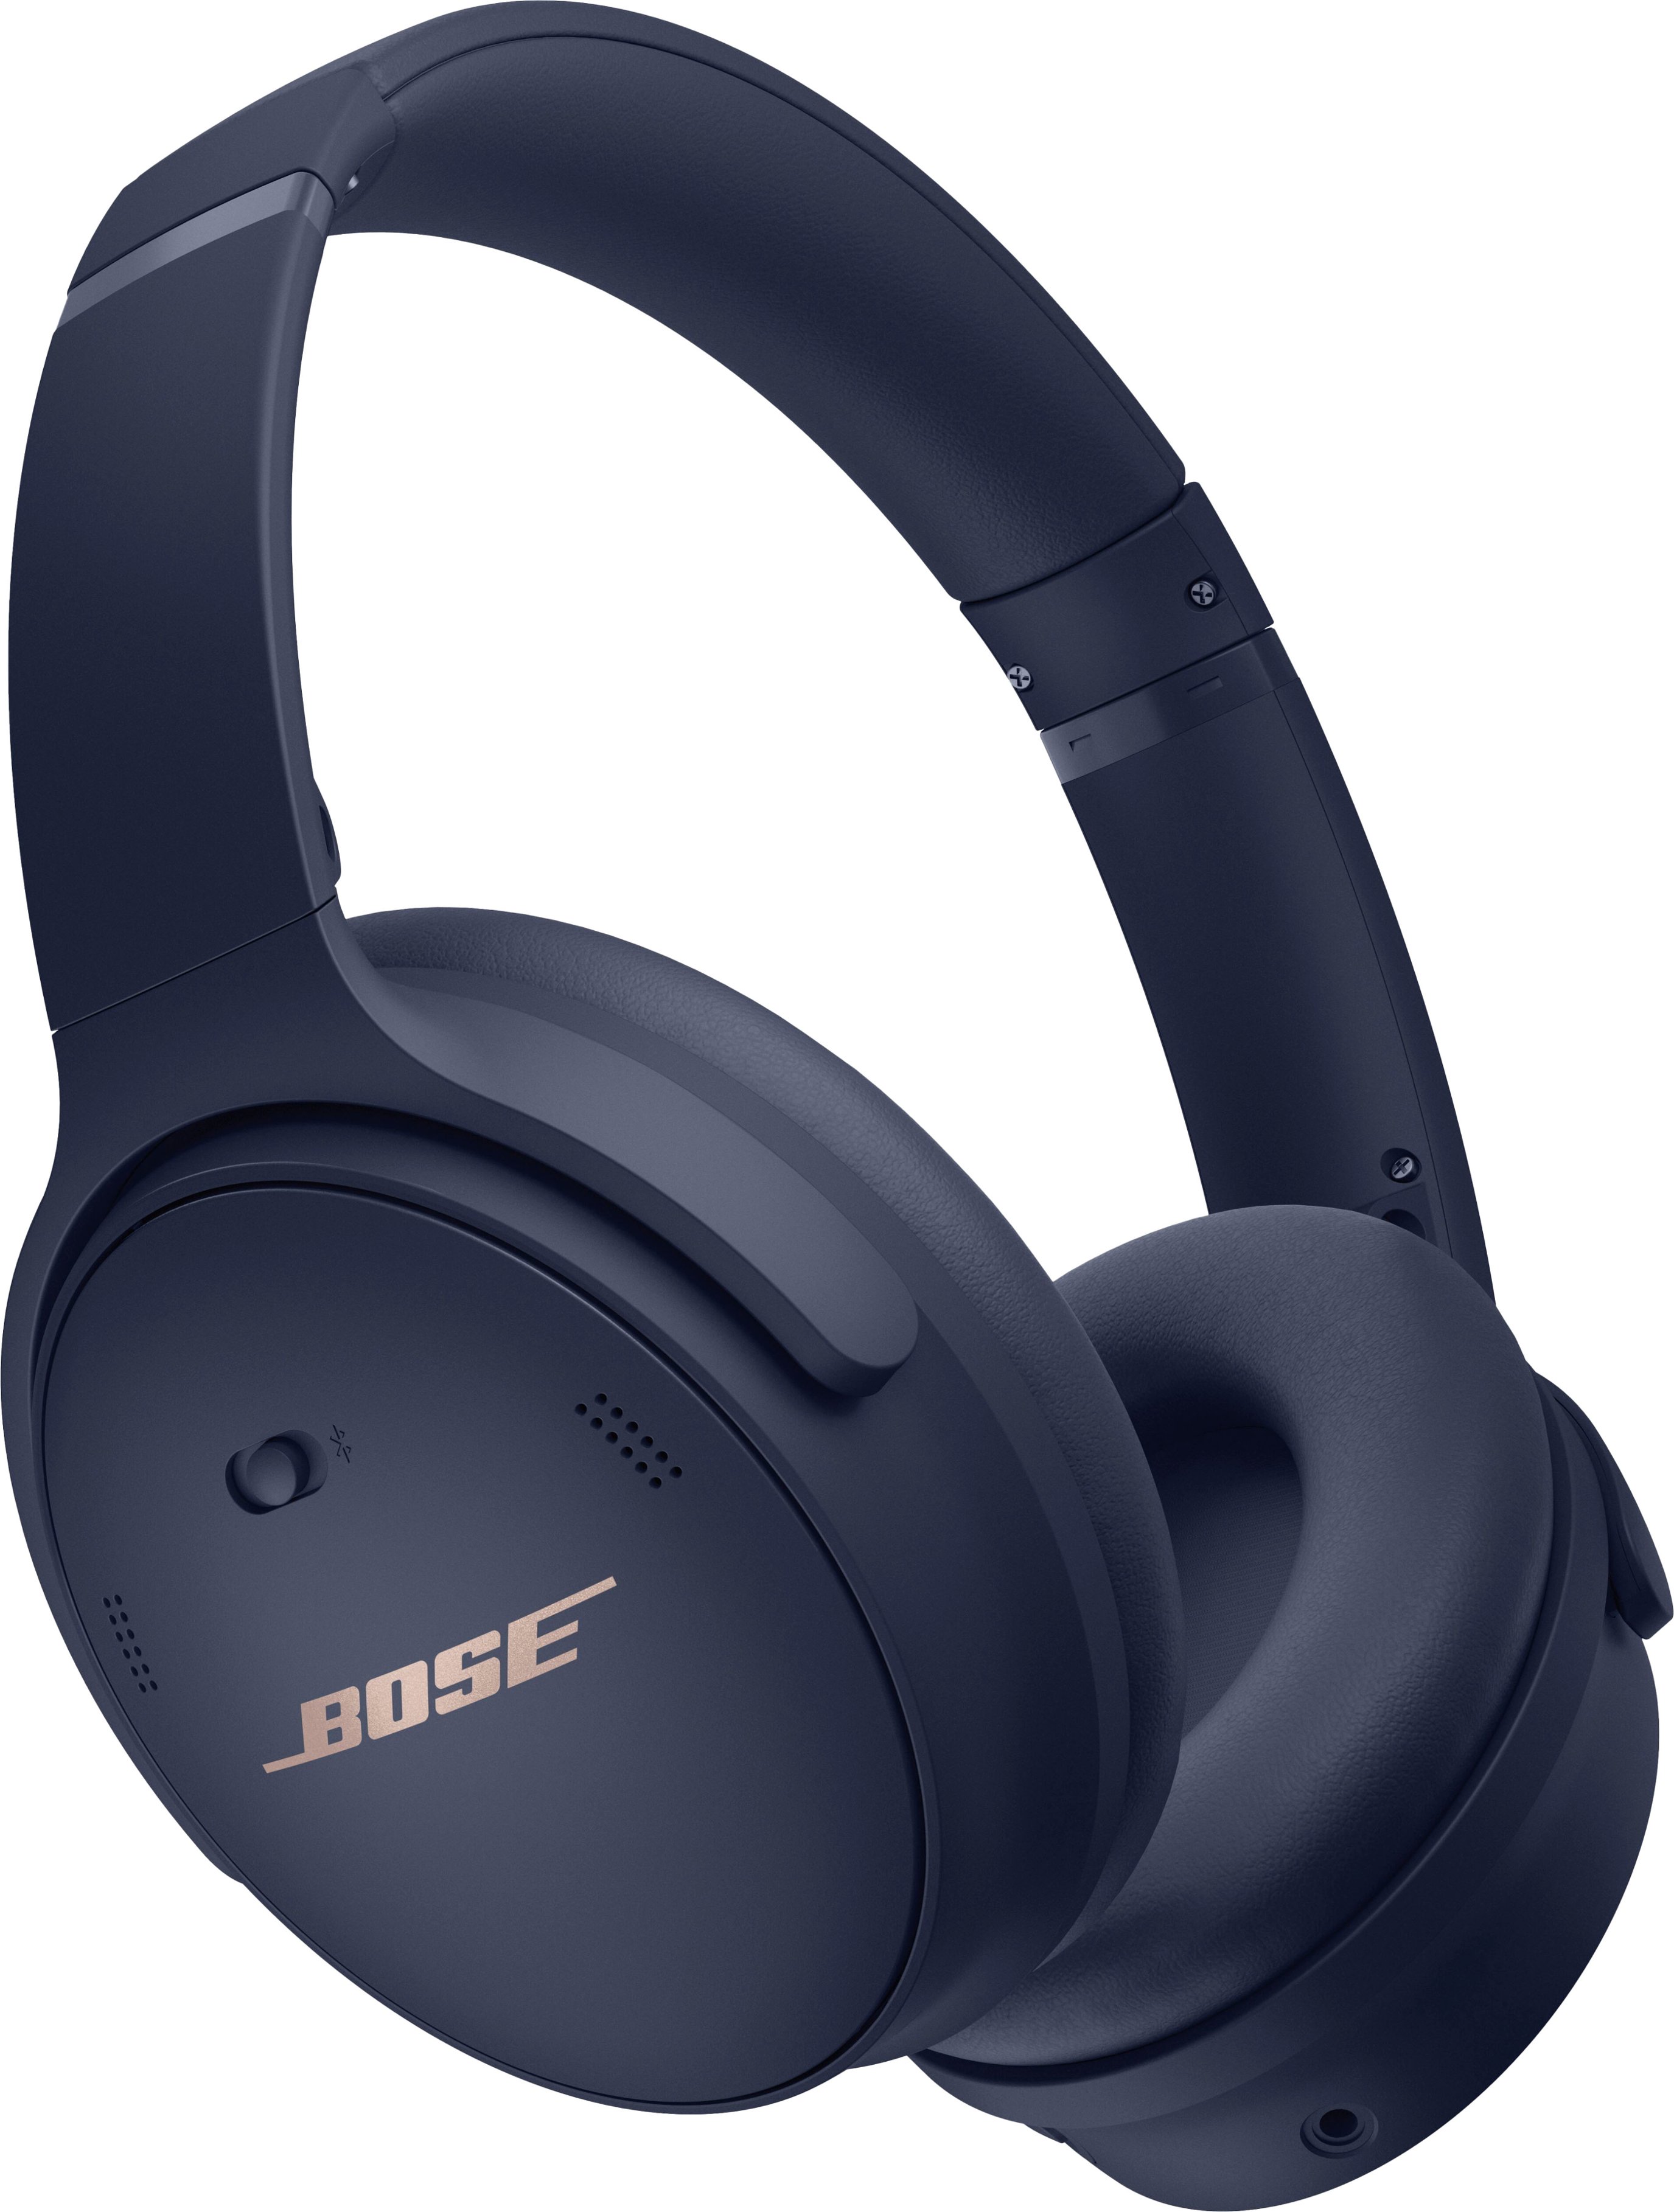 Bose QuietComfort 45 Wireless Noise Cancelling Over-the-Ear Headphones Midnight Blue 866724-0300 - Best